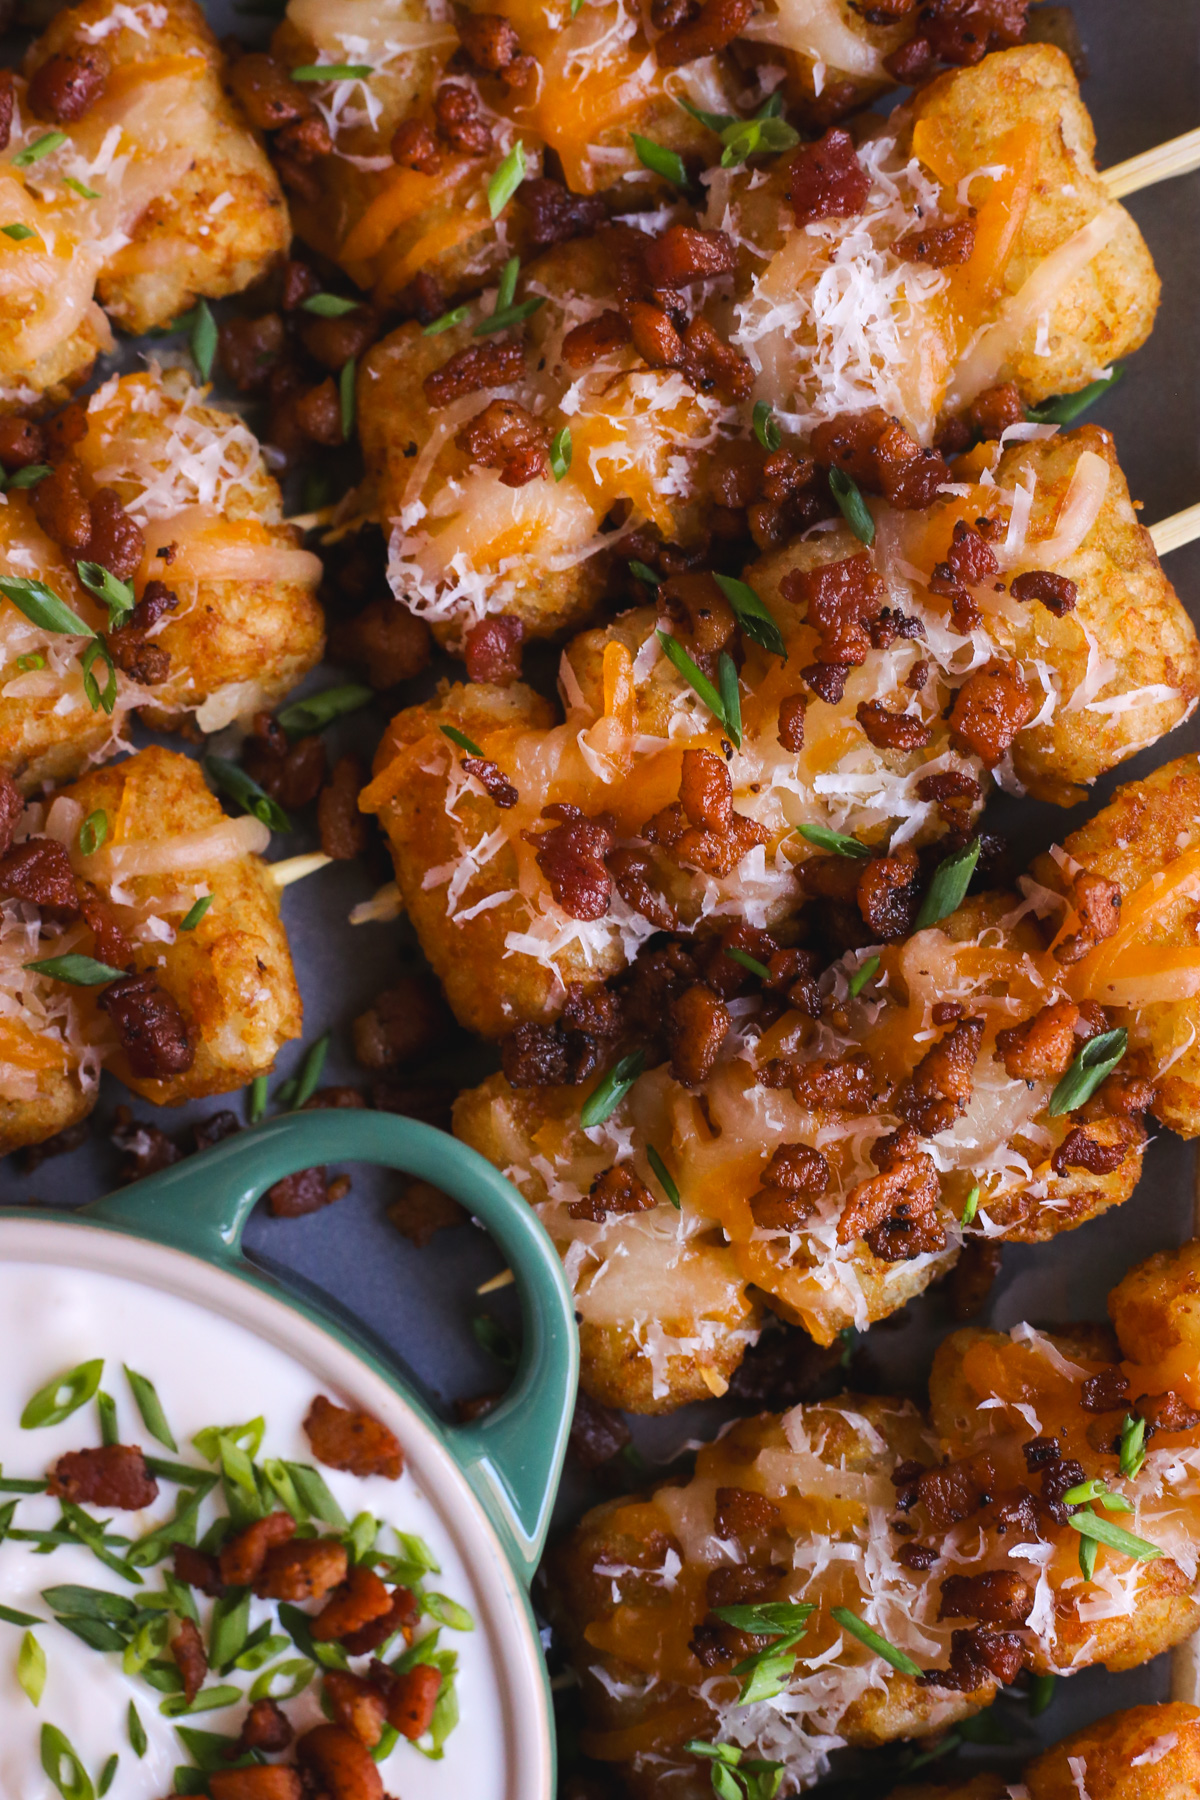 Close up view of loaded tater tots on skewers, with four tater tots stacked on each small wooden skewer, with melted cheese, crispy bacon bits, and chopped chives on top with a small ramekin holding a sour cream dip displayed on the same serving platter